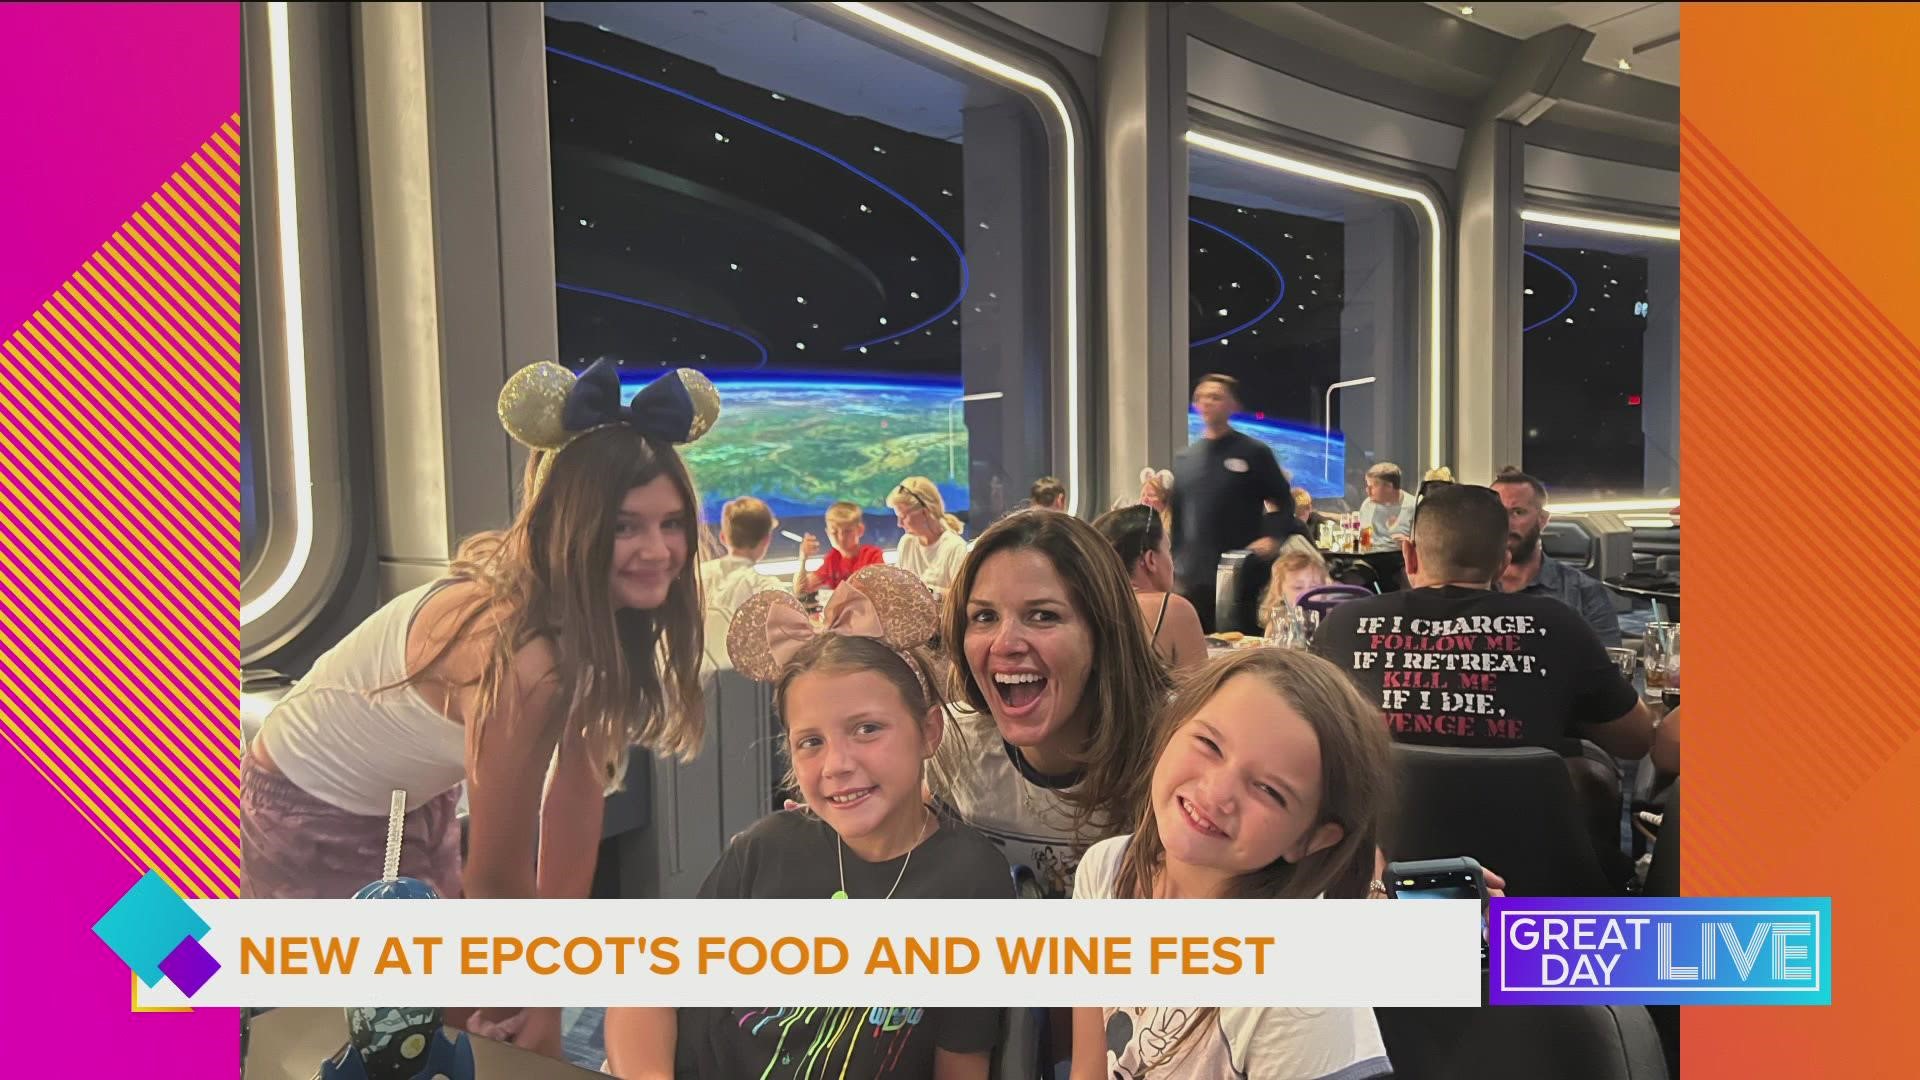 New at Epcot's Food and Wine Fest